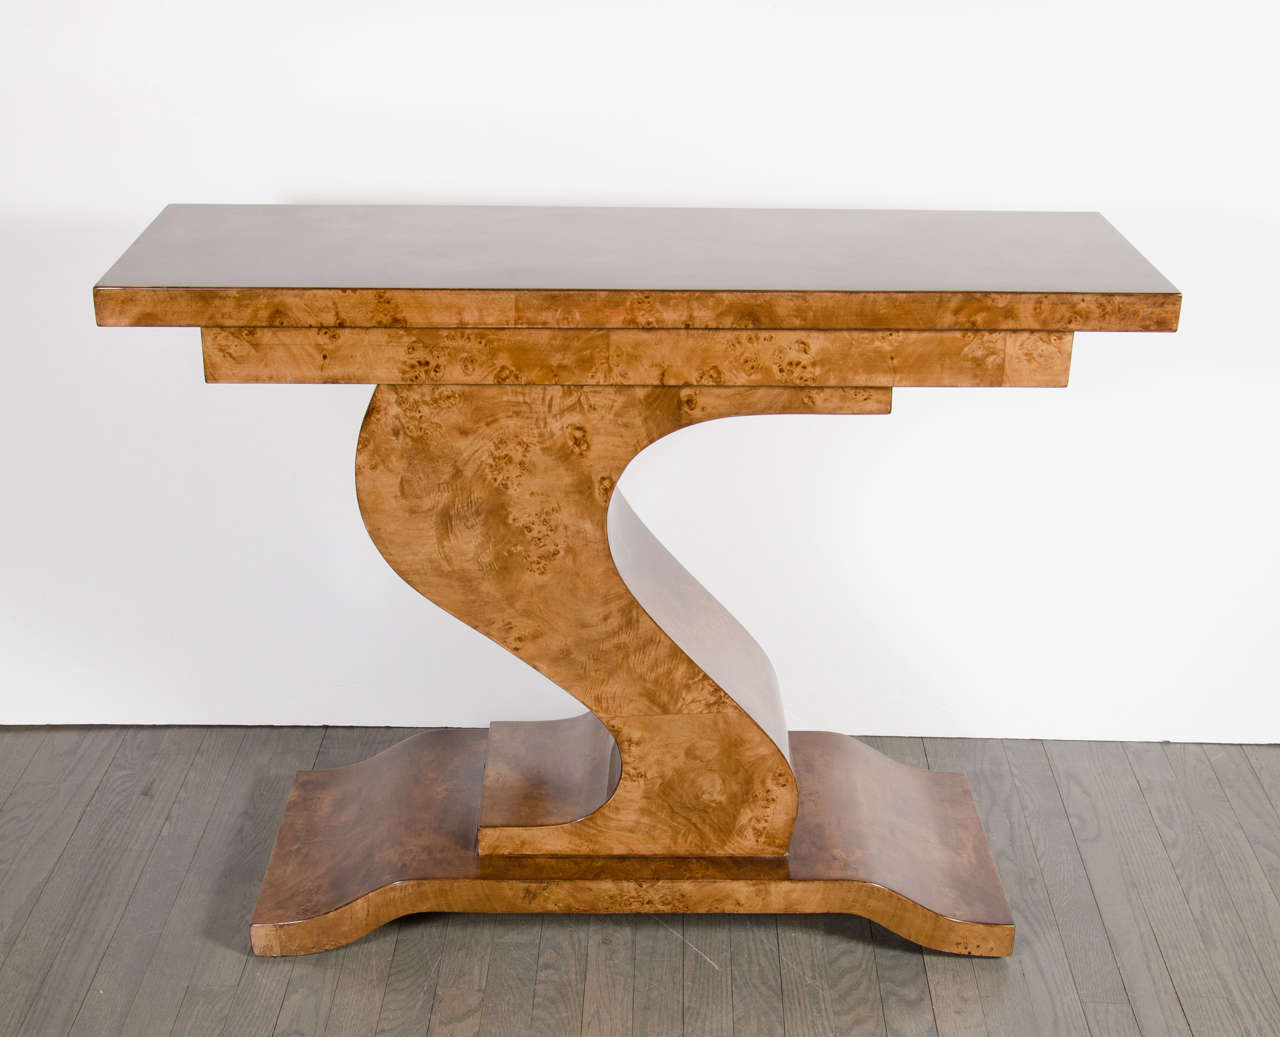 Pair of Mid-Century Modernist console tables in the manner of Karl Springer featured in an asymmetrical fluid design. This pair of exquisite consoles are showcased in their stunning book-matched carpathian elm that rests atop a raised plinth base